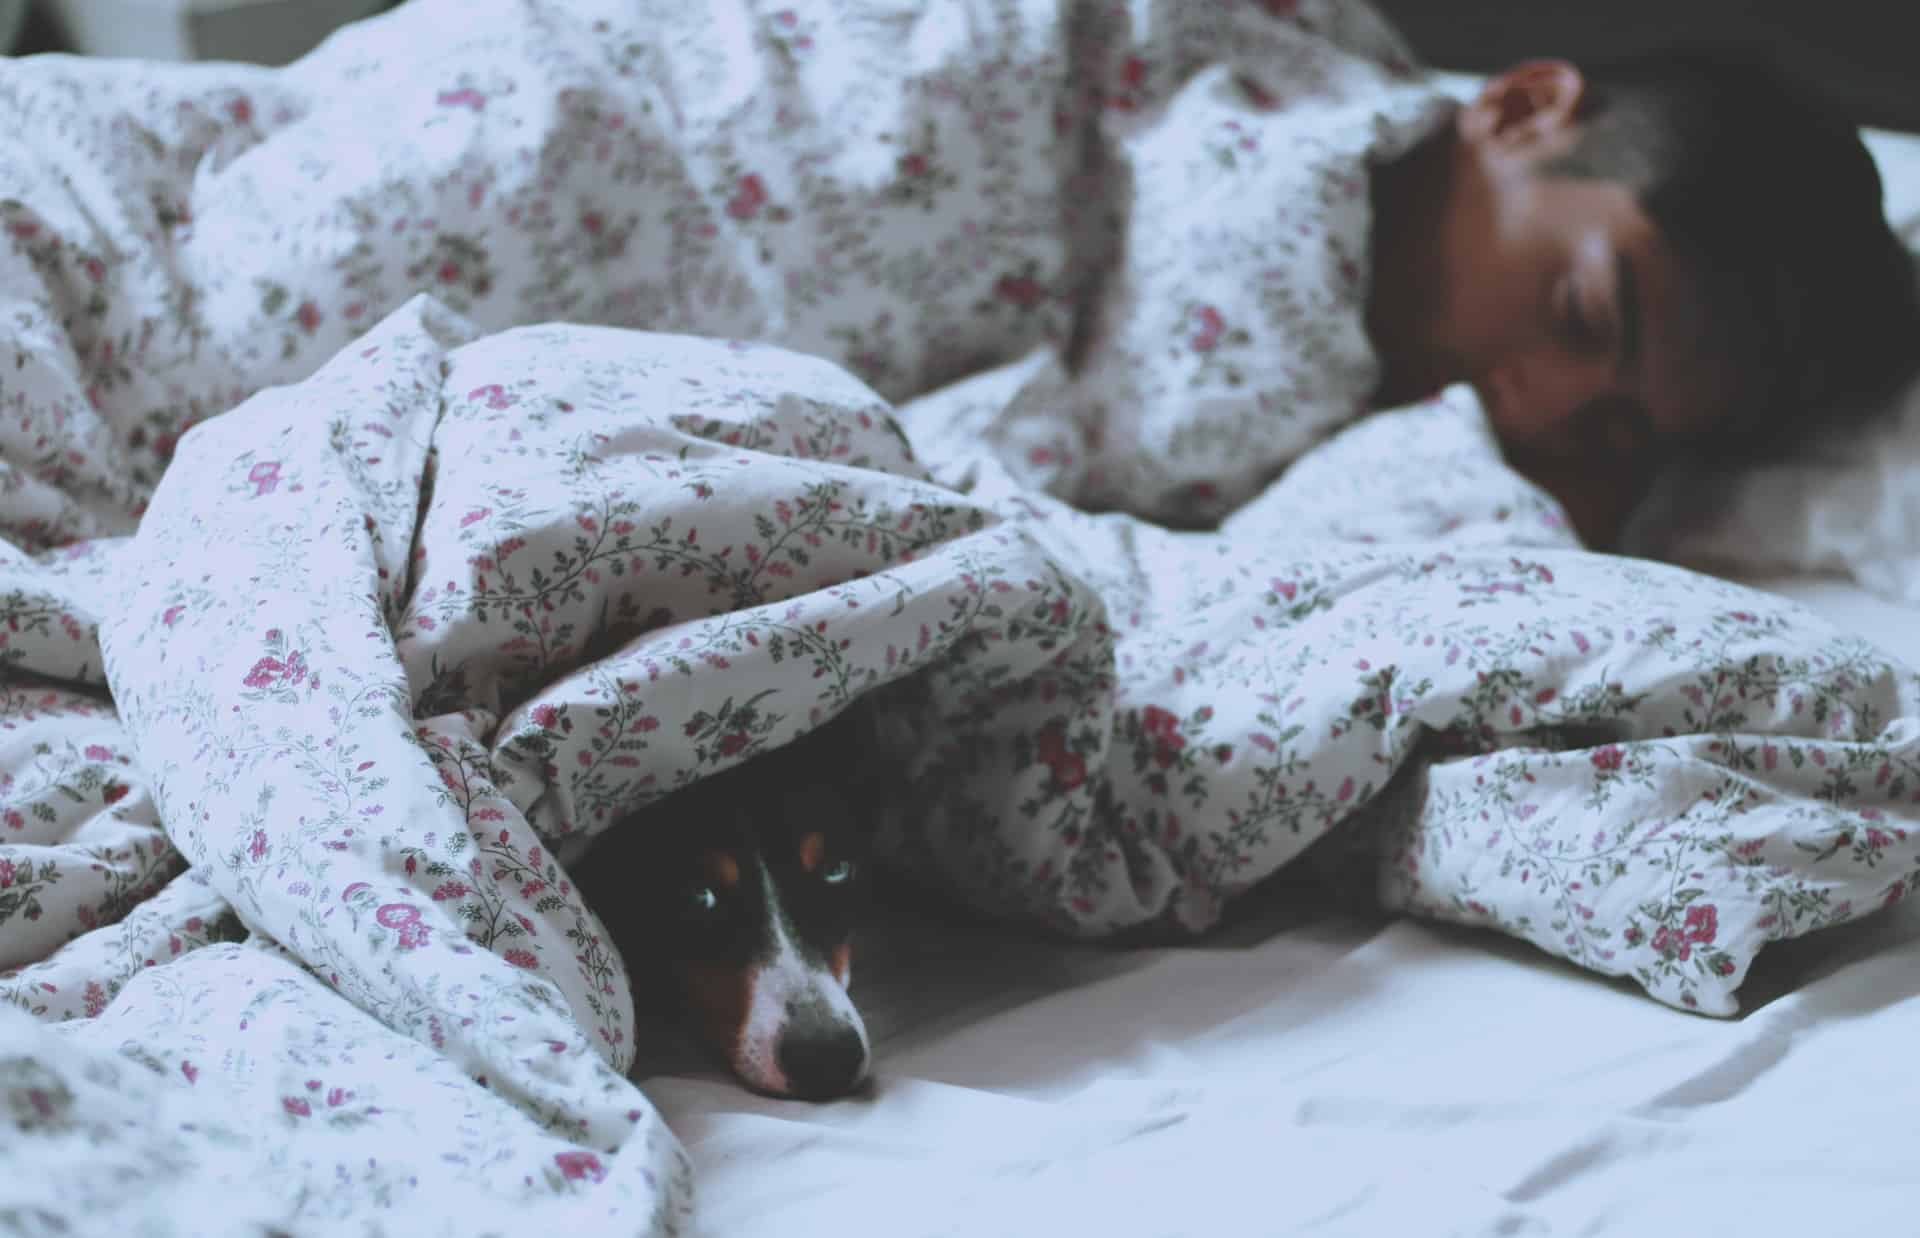 how to prevent hangover, man and dog peeking out from covers